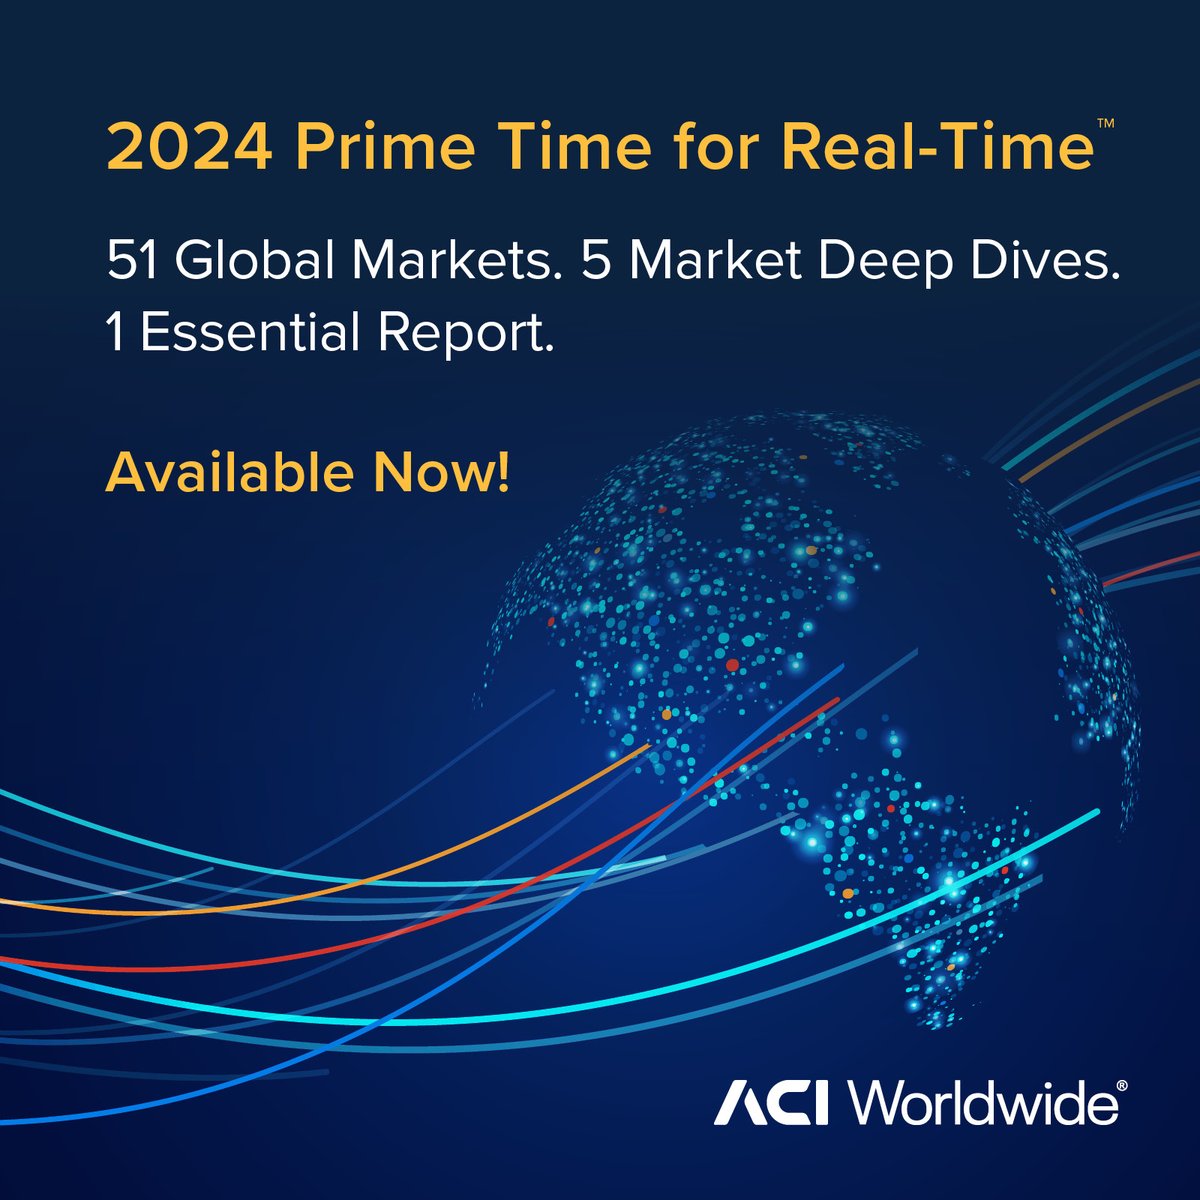 ACI’s most extensive #realtimepayments research report is here! Download the report to explore real-time payment volumes and forecasts across 51 markets. aciw.co/3Unl058